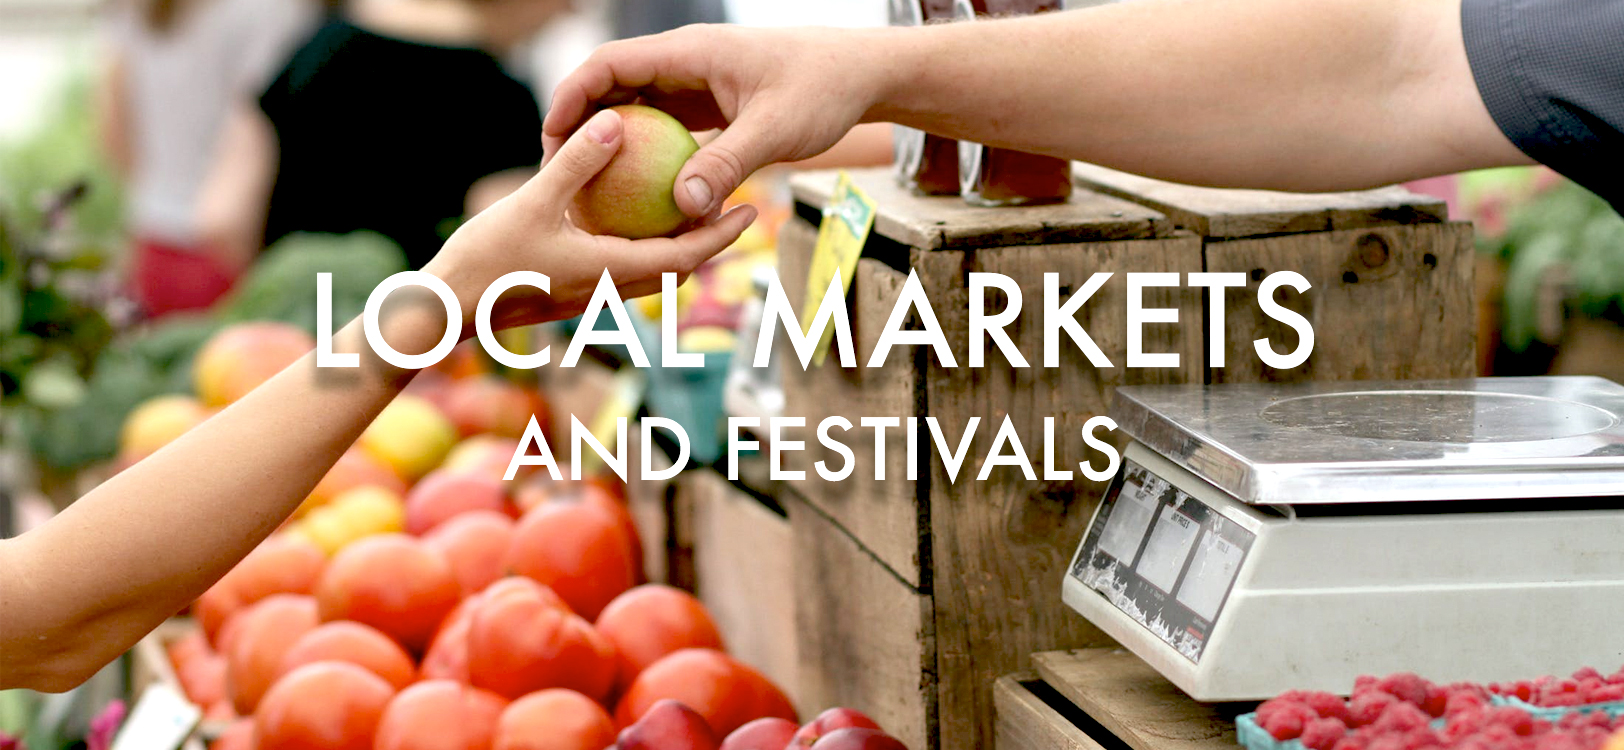 All the latest information and news about local markets and festivals